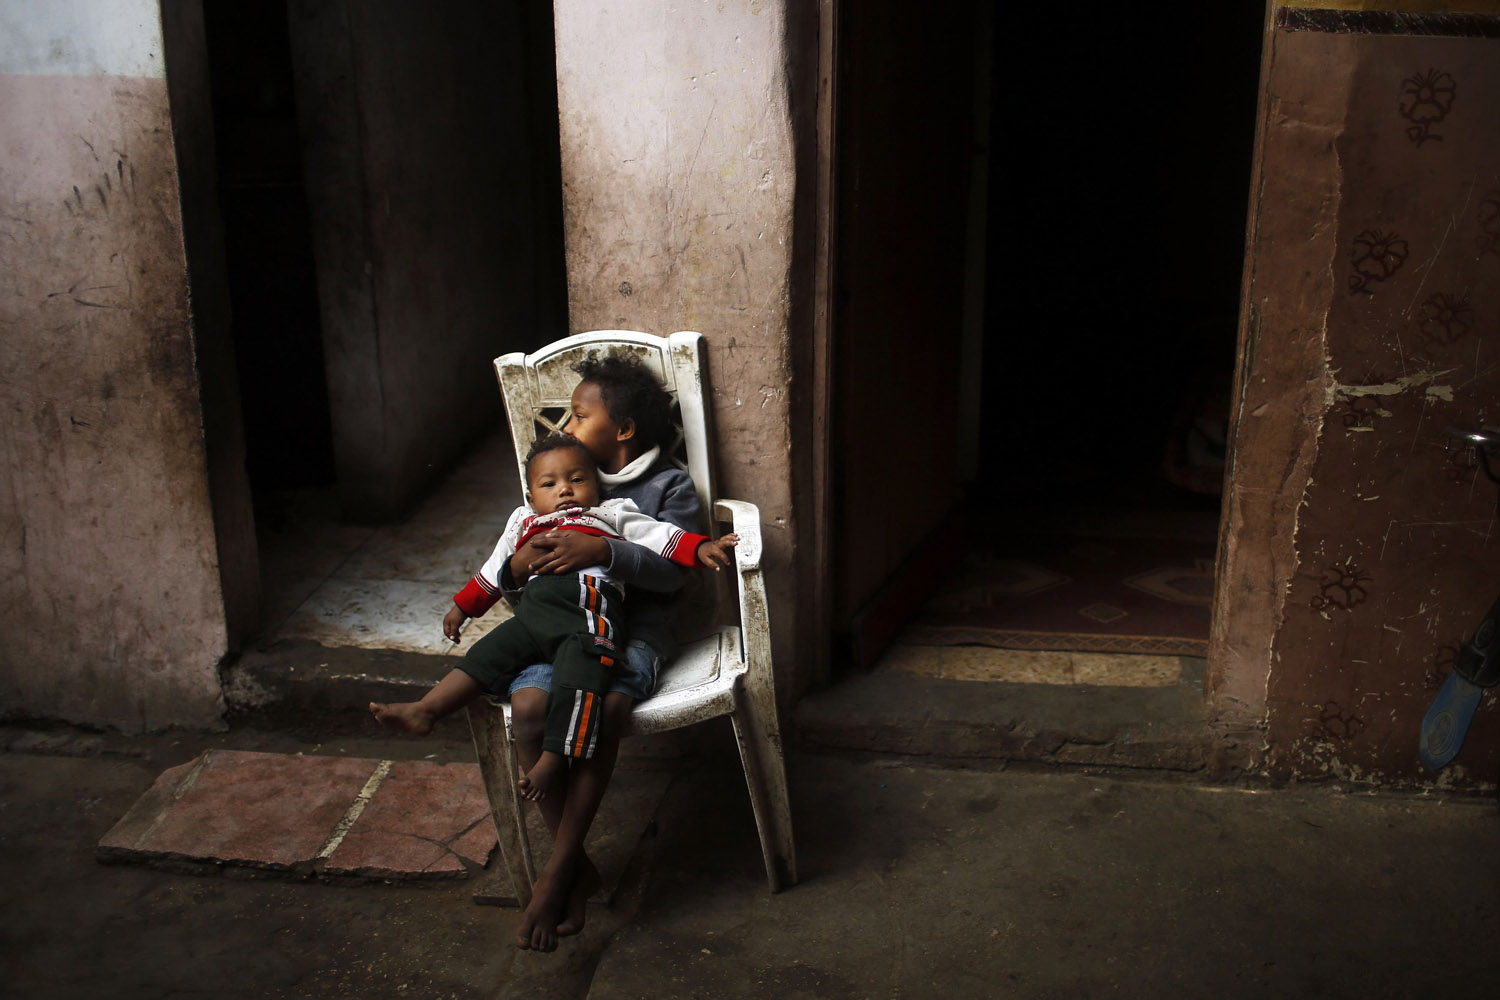 Nov. 18, 2013. A Palestinian girl holds her brother inside their family's dwelling in the northern Gaza Strip.